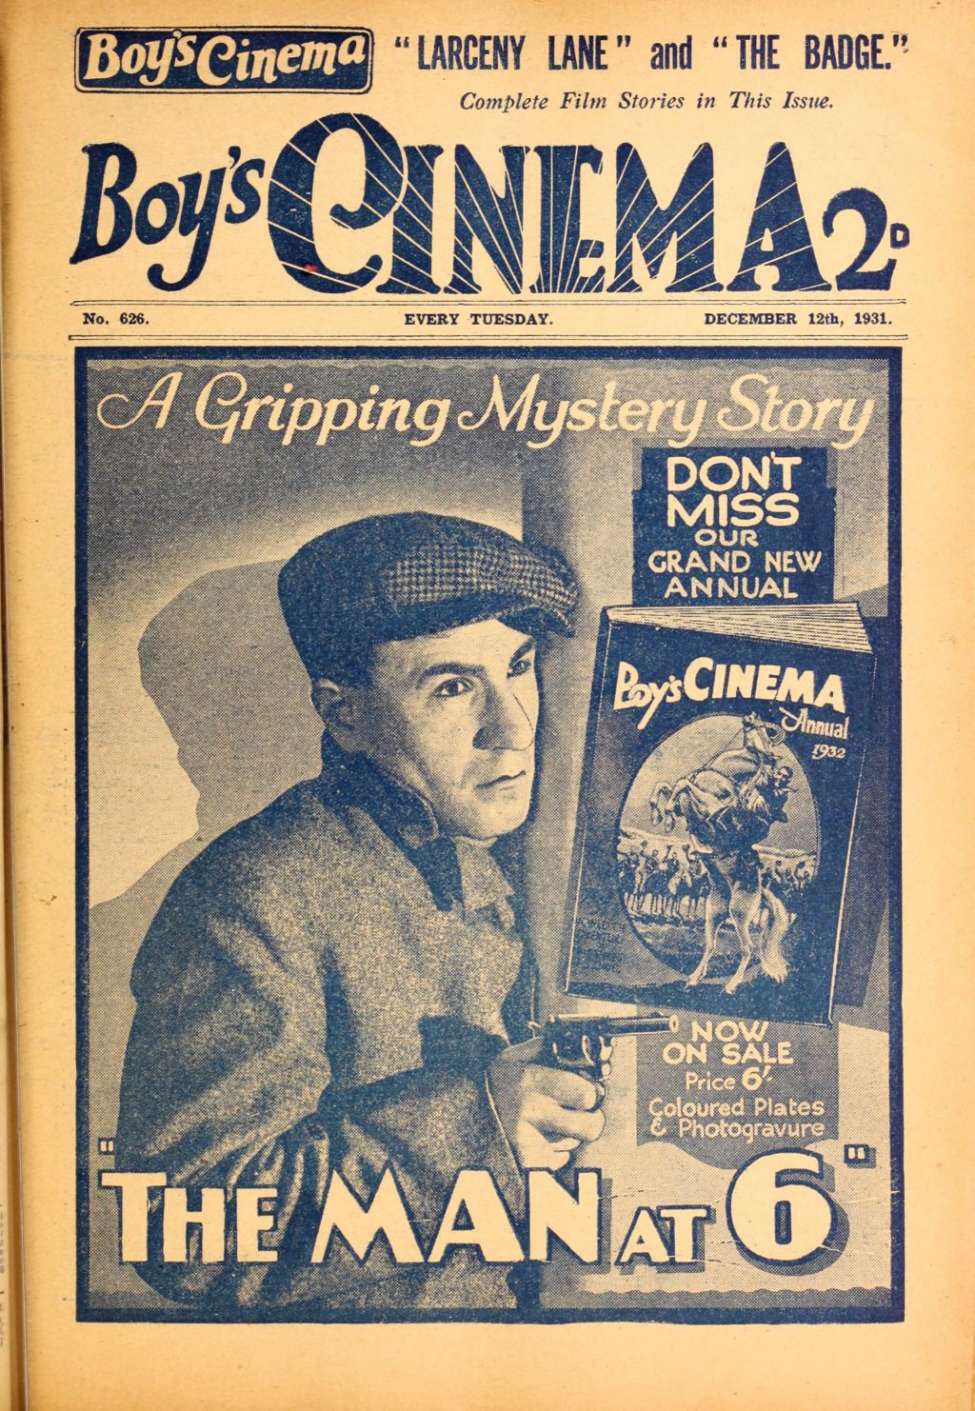 Book Cover For Boy's Cinema 626 - The Man at 6 - Gerald Rawlinson